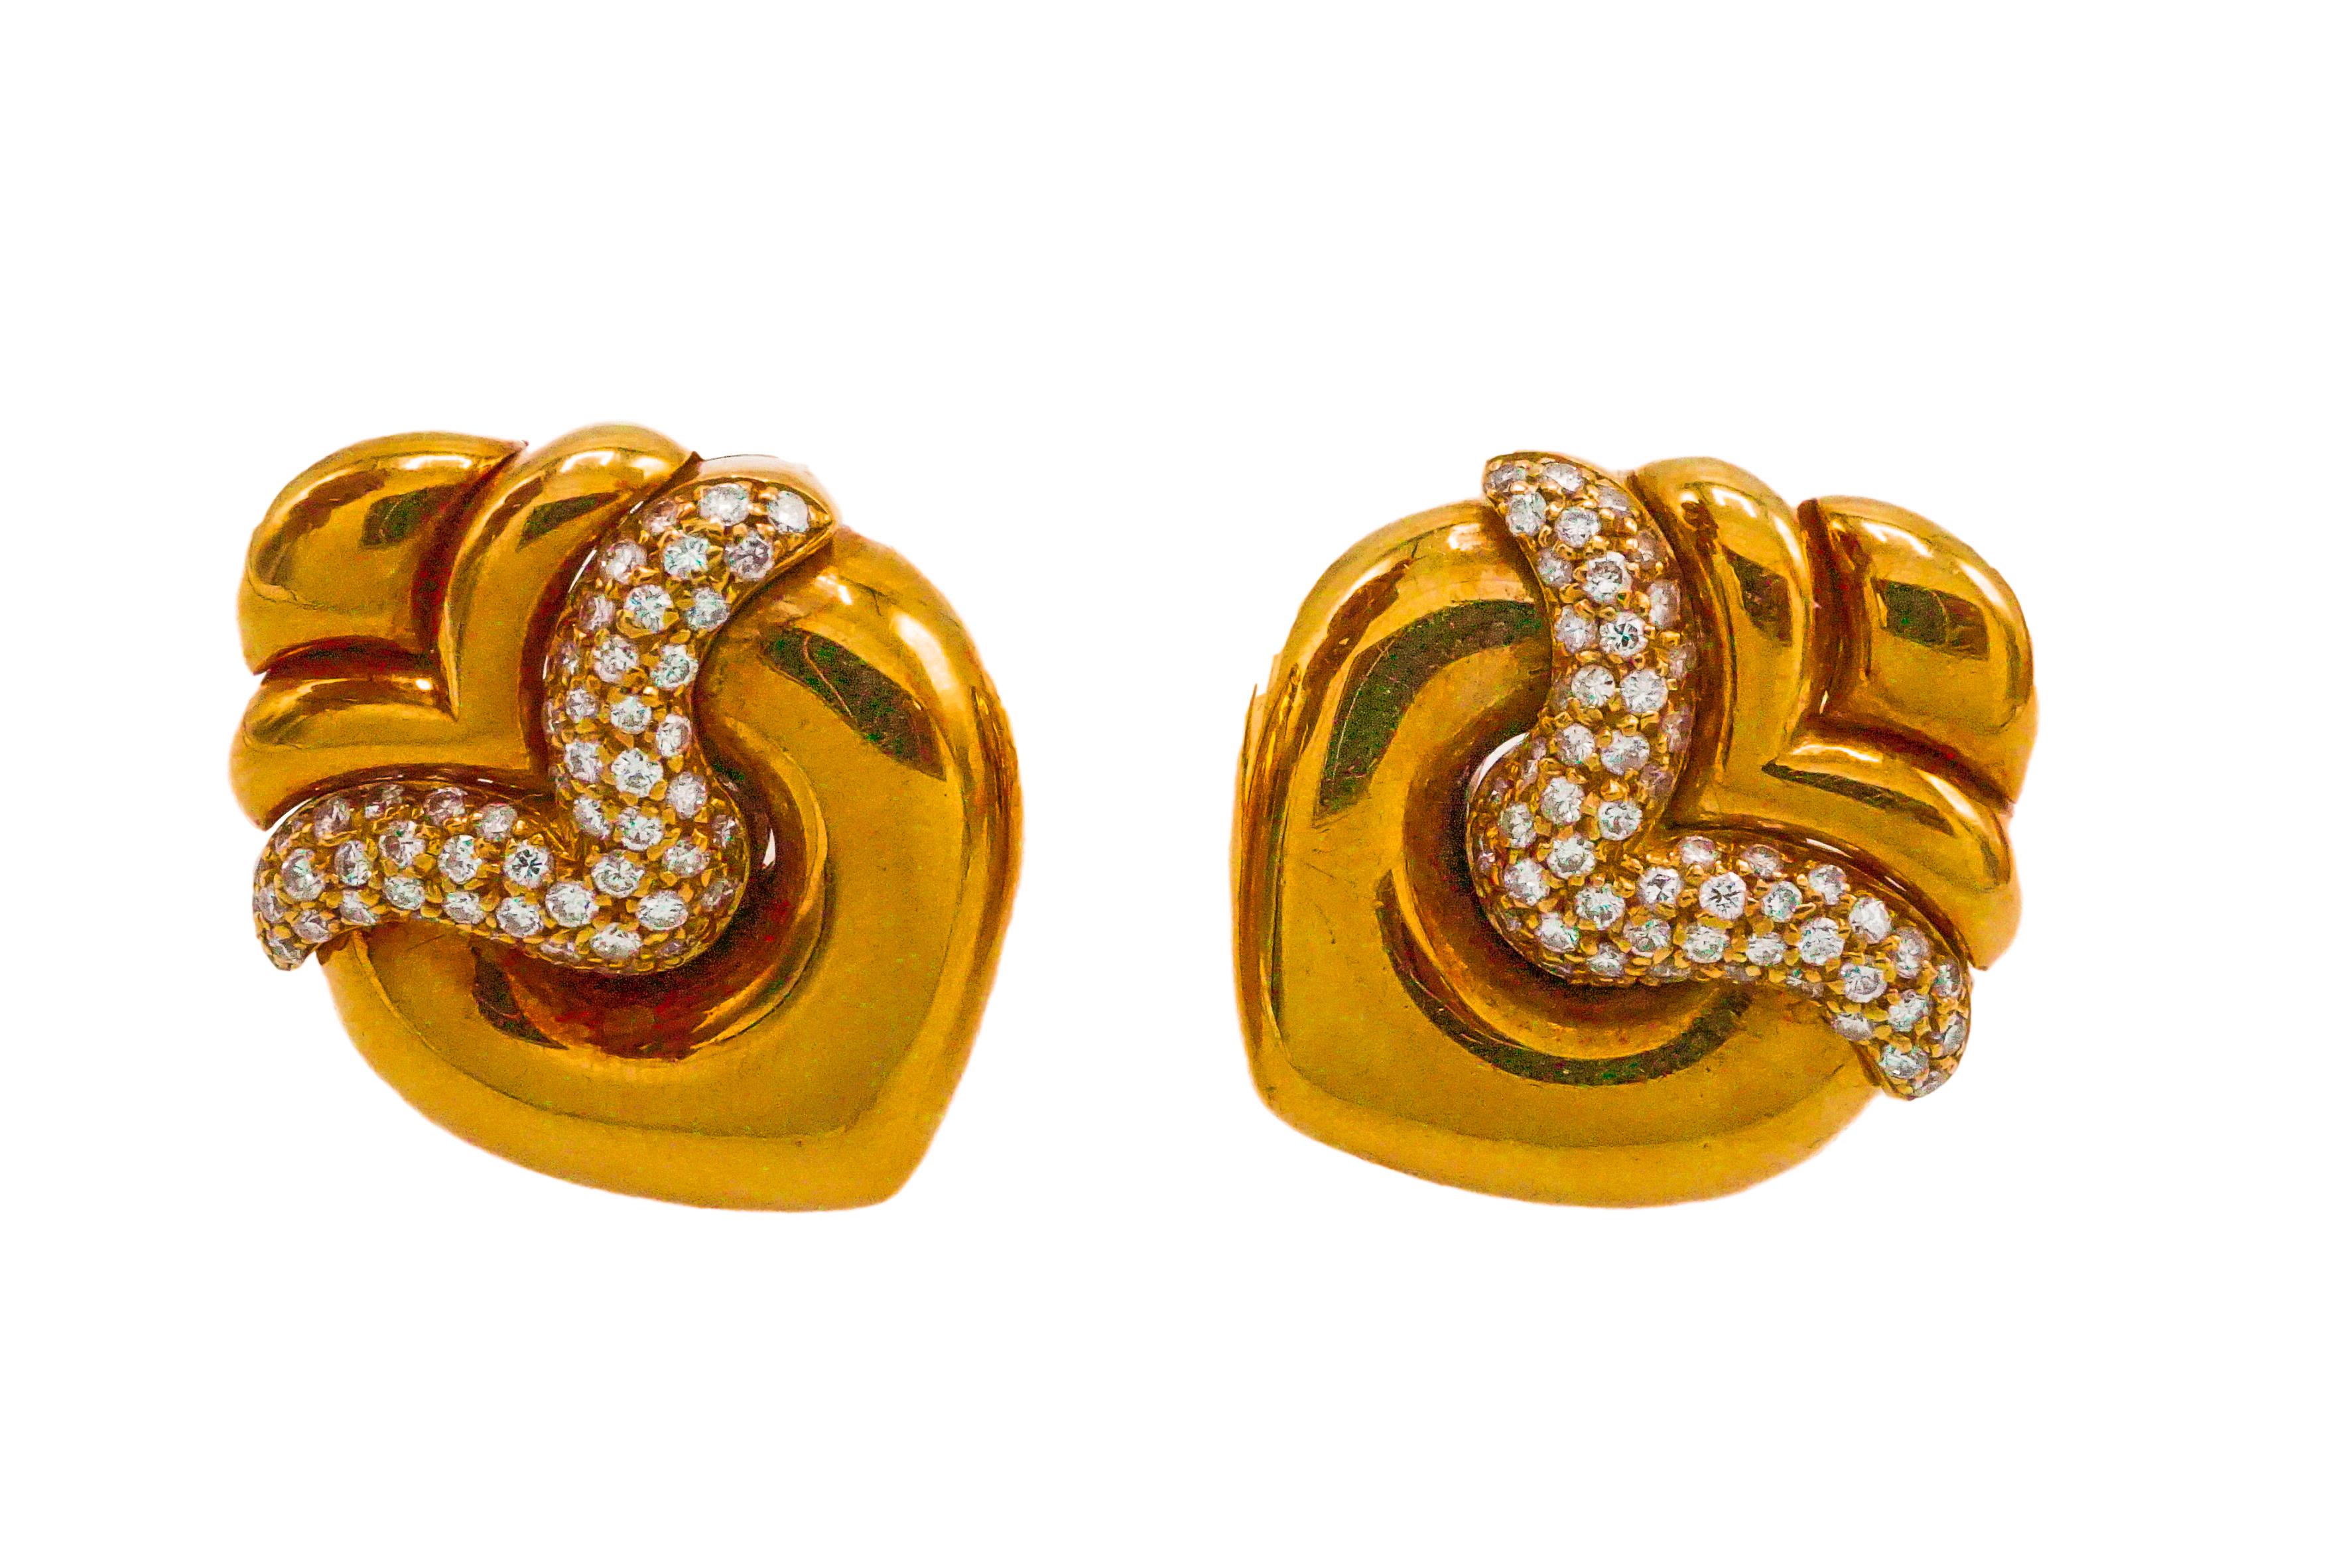 BULGARI GOLD AND DIAMOND EARRINGS
Each sculpted and polished gold earring with round diamond accents

Metal: 18k yellow gold
Diamonds: 110 round diamonds with approximate total weight of 1.45 - 1.65 carats
Signature: BULGARI
Marks: 750,